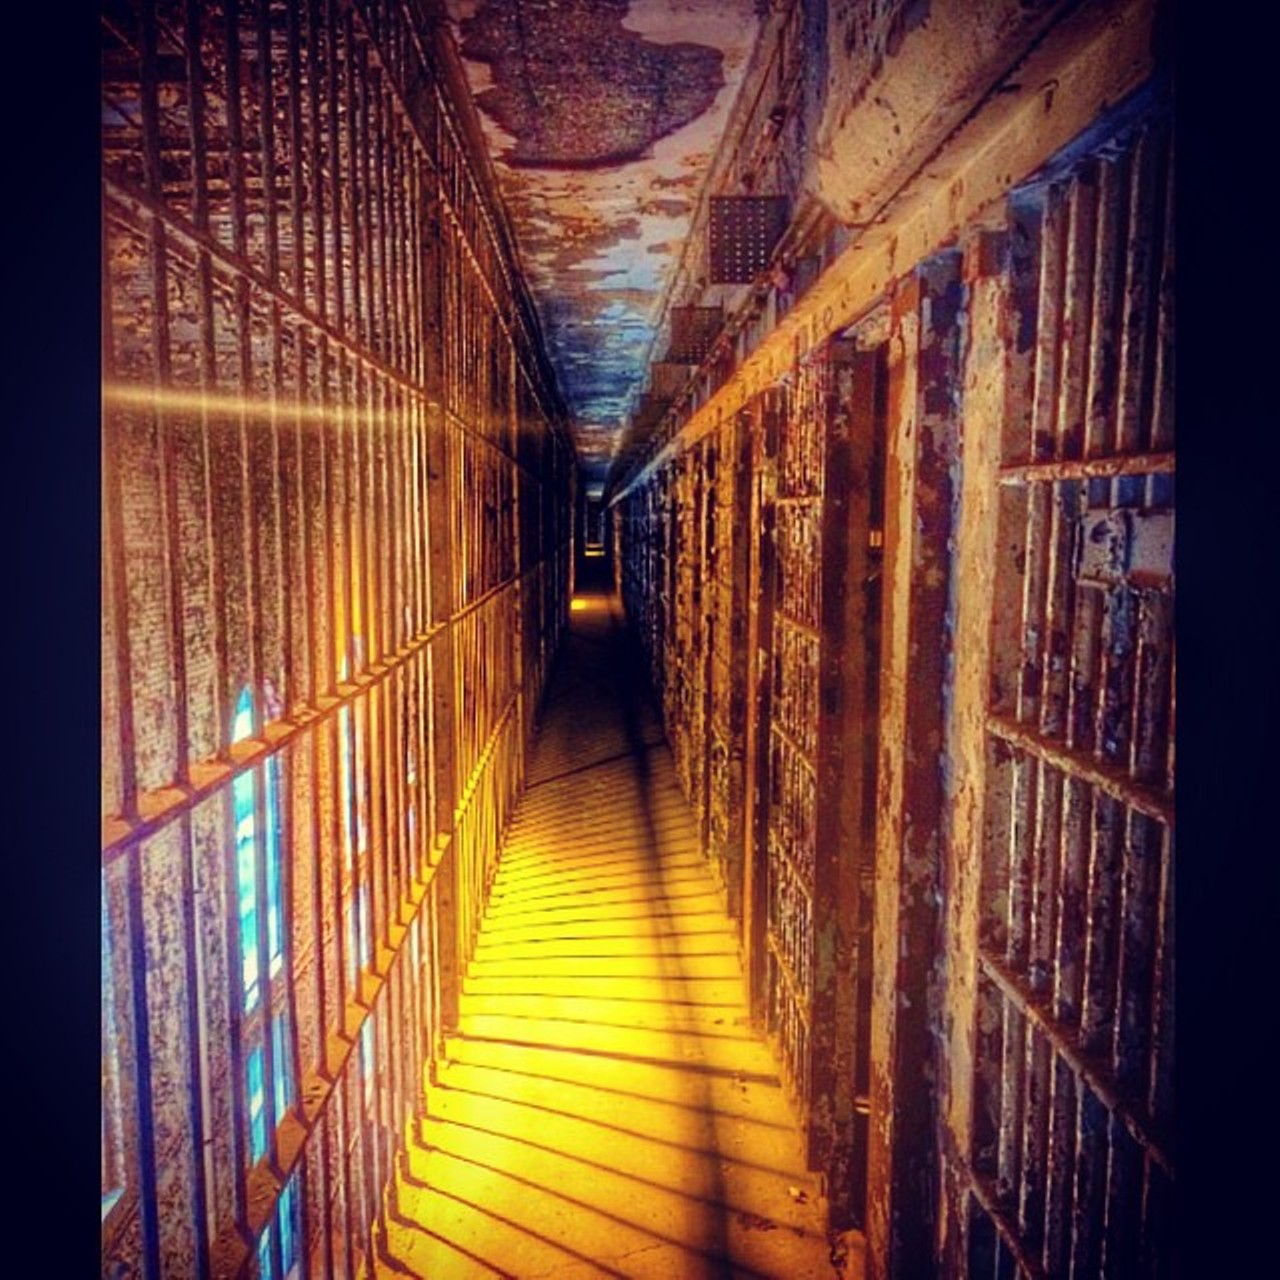 The Ohio State Reformatory's Haunted Prison Experience might be the most unique. The whole frightful experience unravels inside the old reformatory in Mansfield that was closed in 1990. (This is the same prison that was used for location shots in The Shawshank Redemption, and it has developed a reputation as one of the scariest places in the world.) Complete with actors, visual effects and props, the Haunted Prison Experience has won multiple awards for being genuinely frightening. You must be 13 or older to enter, and if there's any doubt, you will be asked to provide proof of a birth date. (100 Reformatory Rd., Mansfield; hauntedx.com)